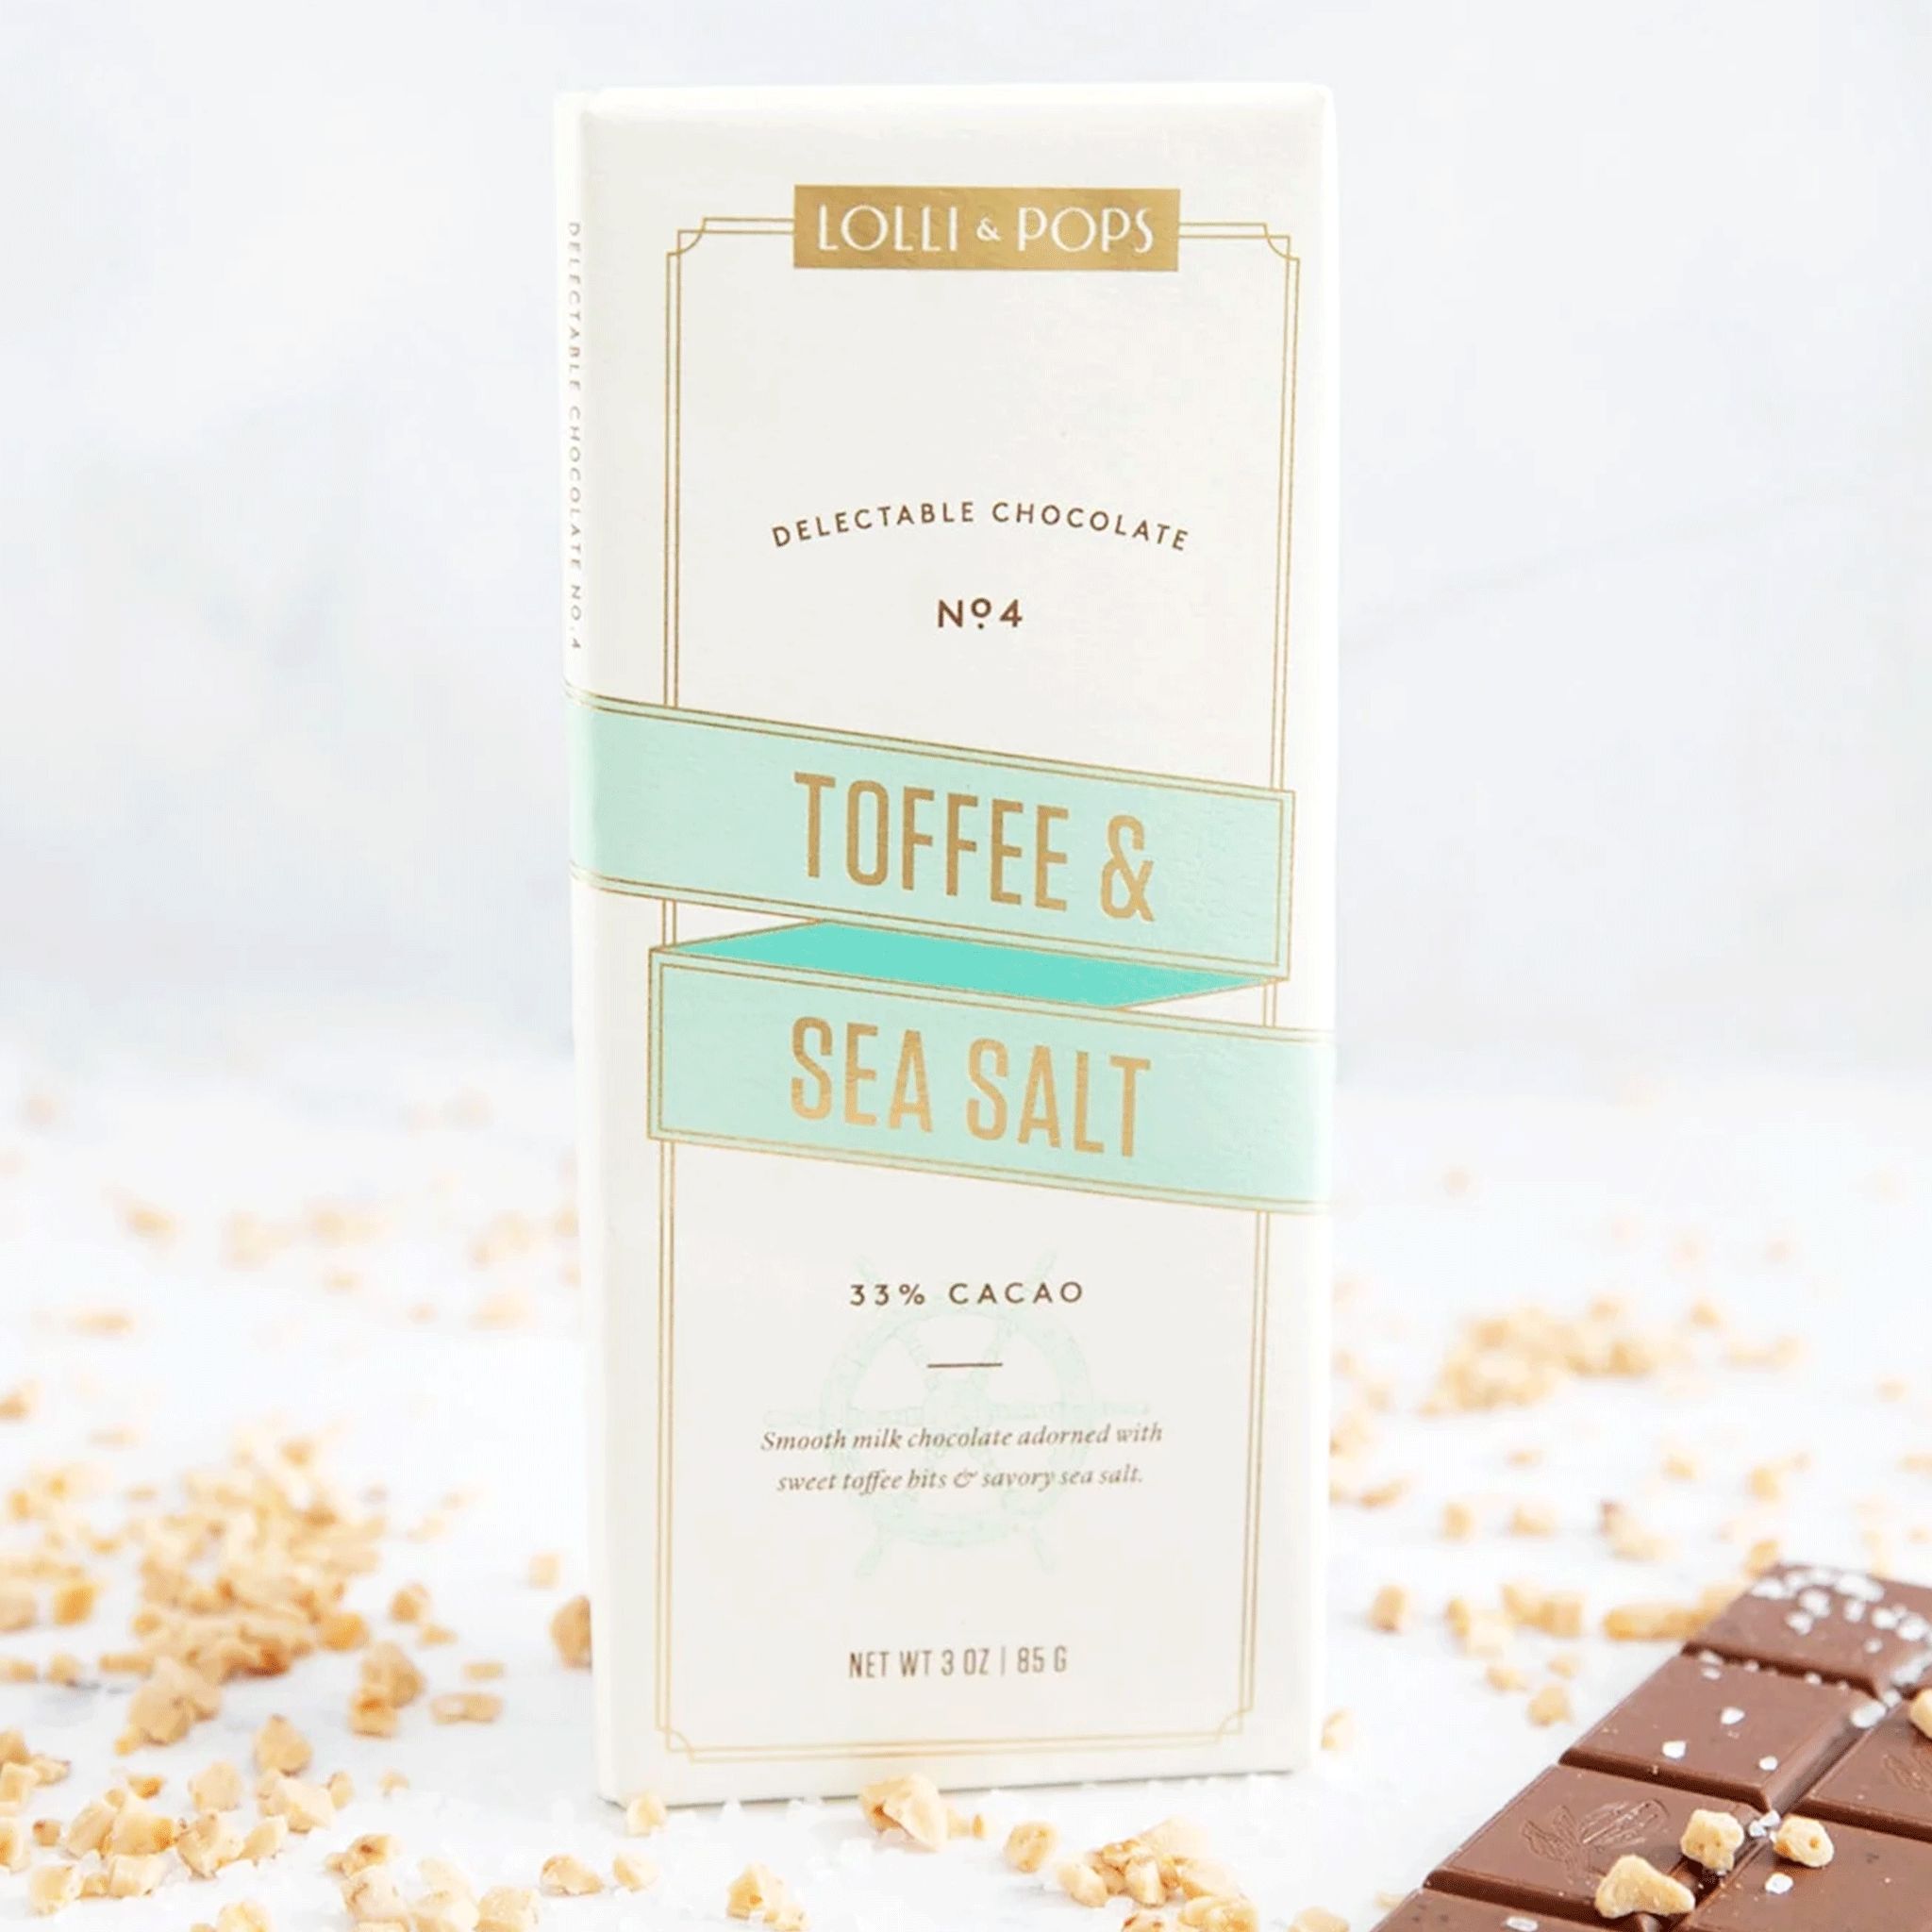 On a white background is a neutral colored package of a chocolate bar with toffee and sea salt. 